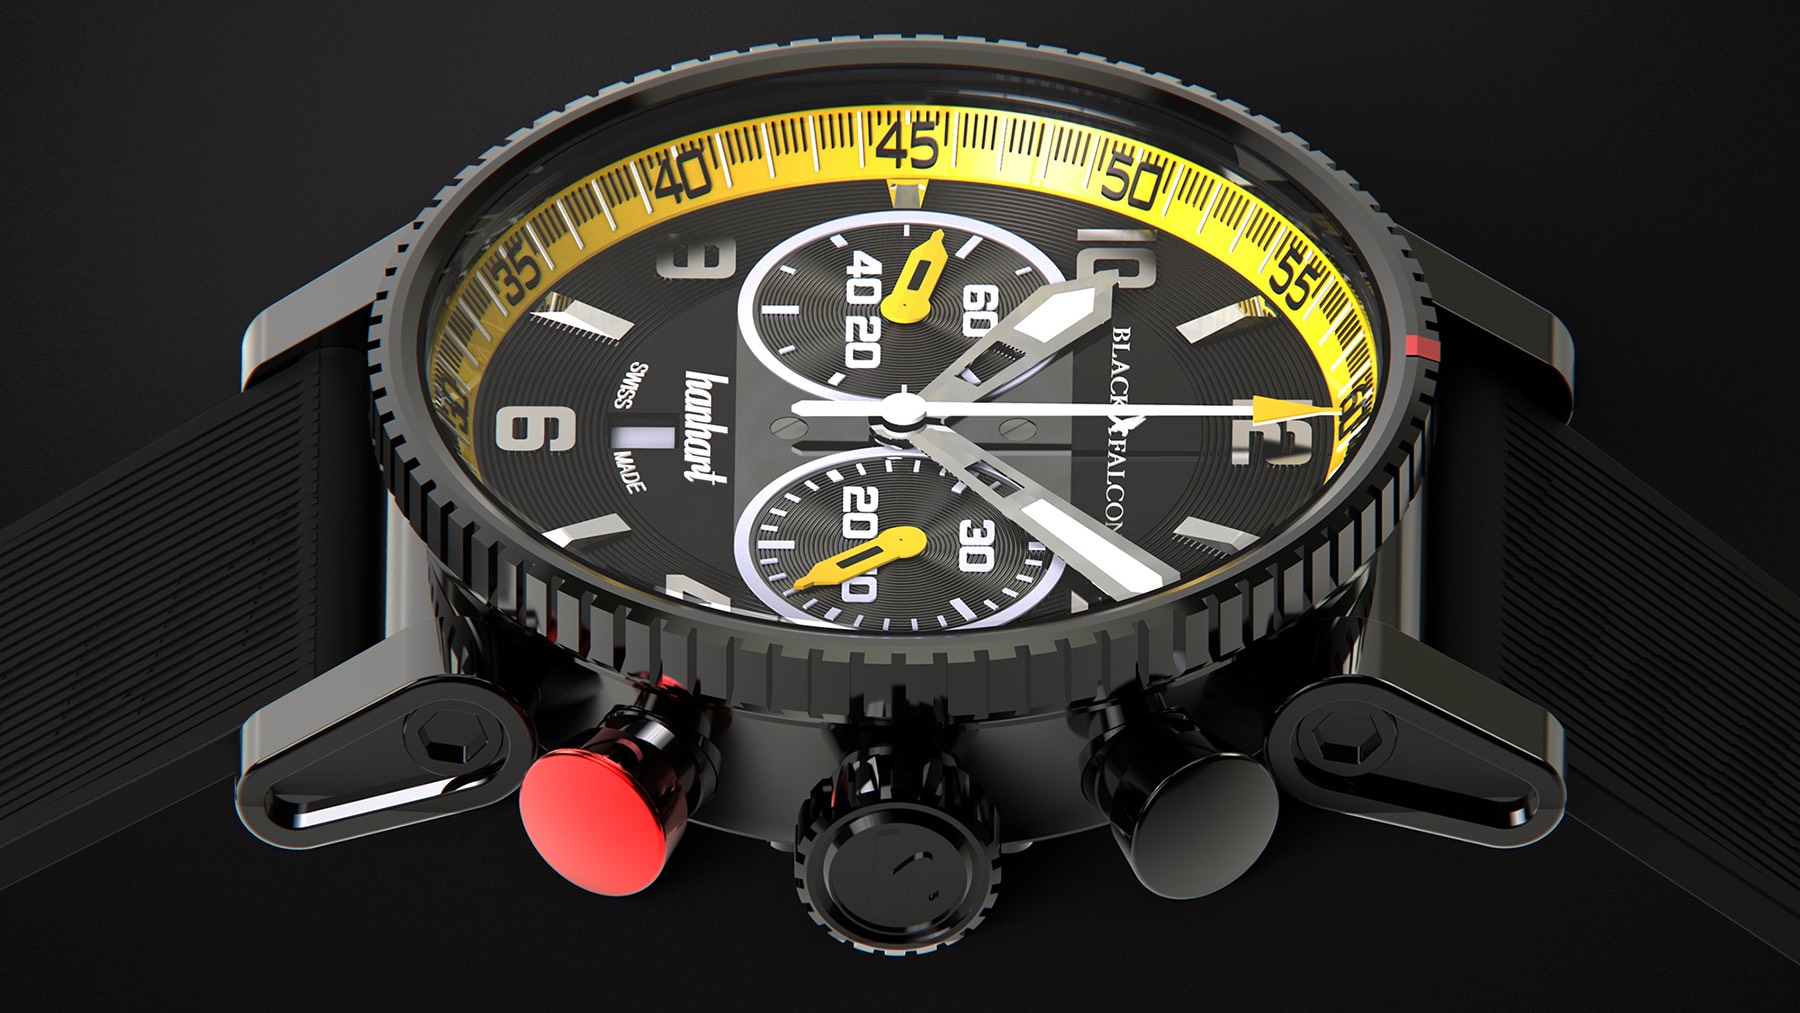 Introducing – Hanhart Primus Black Falcon Limited Edition - WATCHLOUNGE